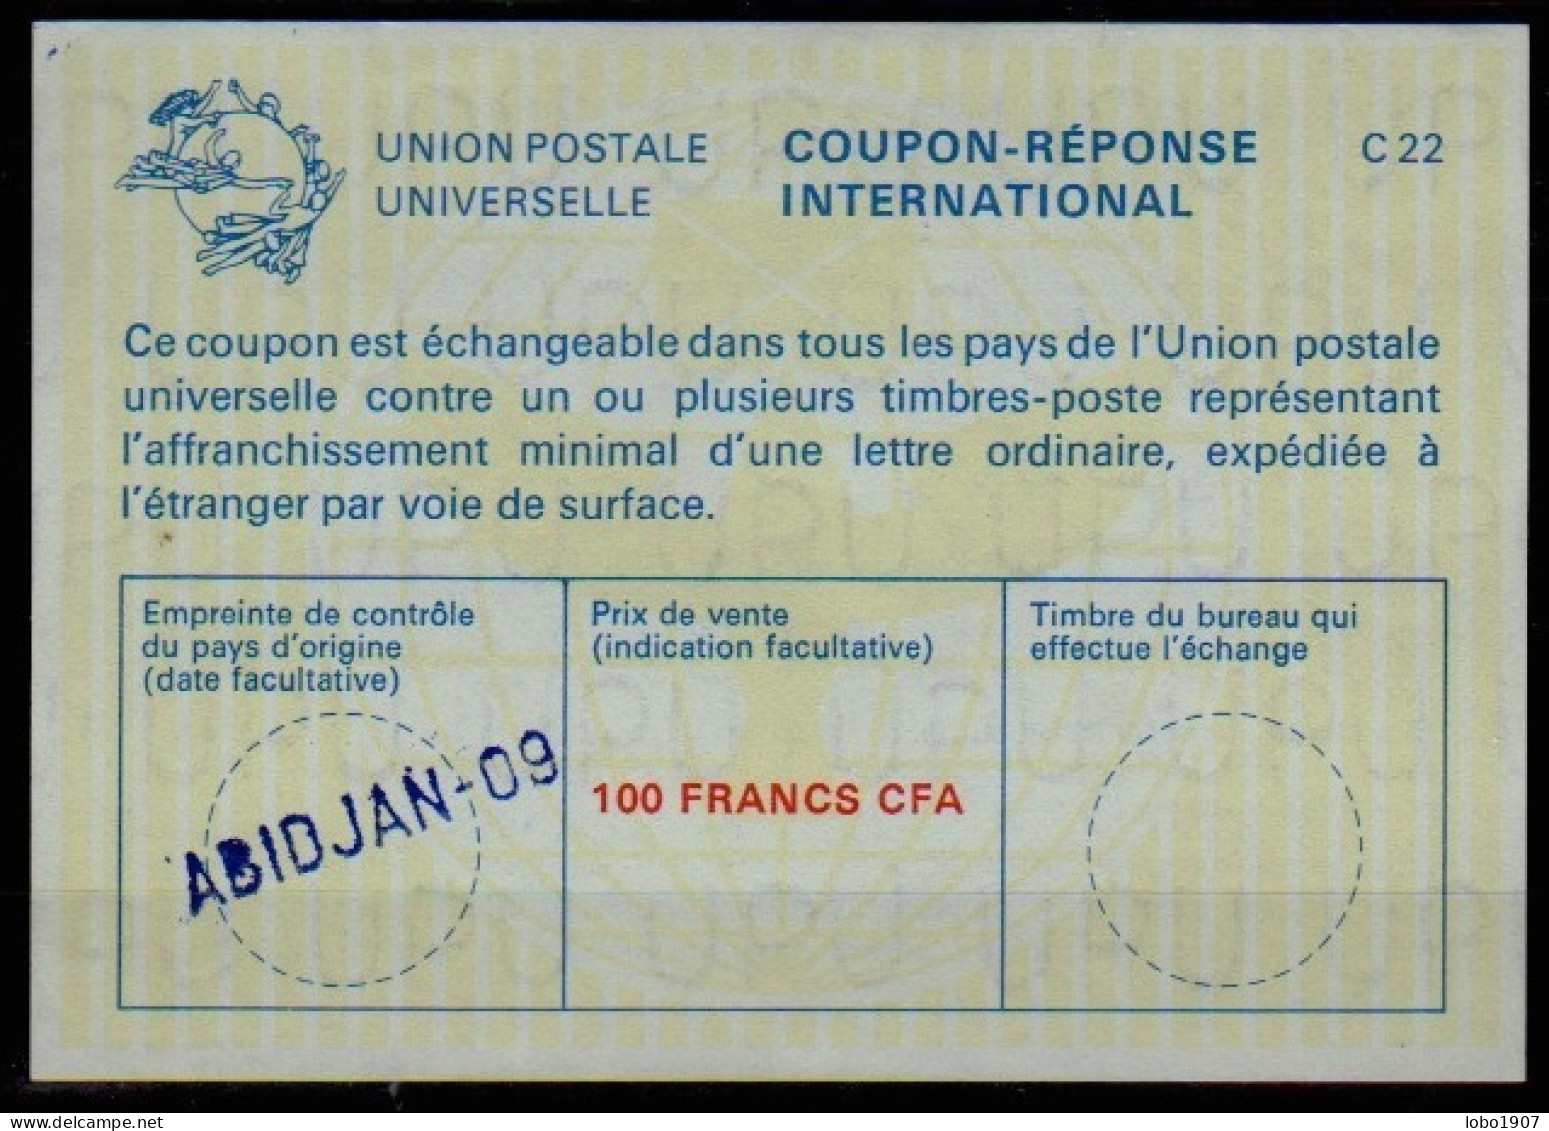 CÔTE D'IVOIRE IVORY COAST  La22A  100 FRANCS CFA  Int. Reply Coupon Reponse Antwortschein IRC IAS O ABIDJAN-09 - Ivoorkust (1960-...)